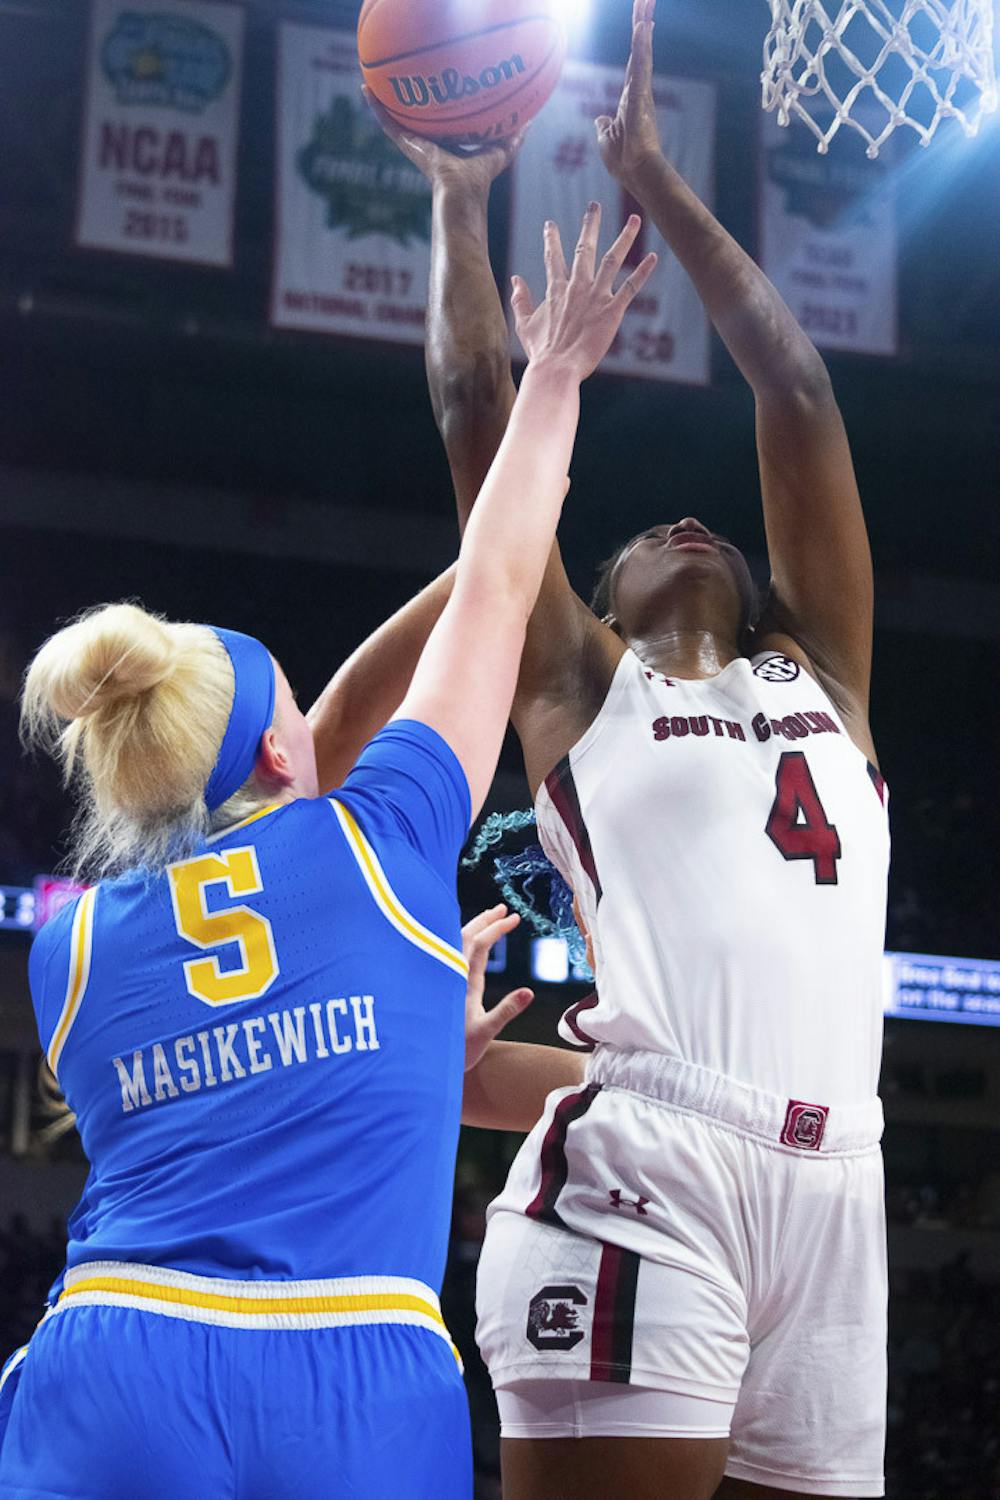 <p>Senior forward Aliyah Boston goes in for a point during South Carolina's matchup with UCLA on Nov. 29, 2022. The Gamecocks beat the Bruins 73-64.</p>